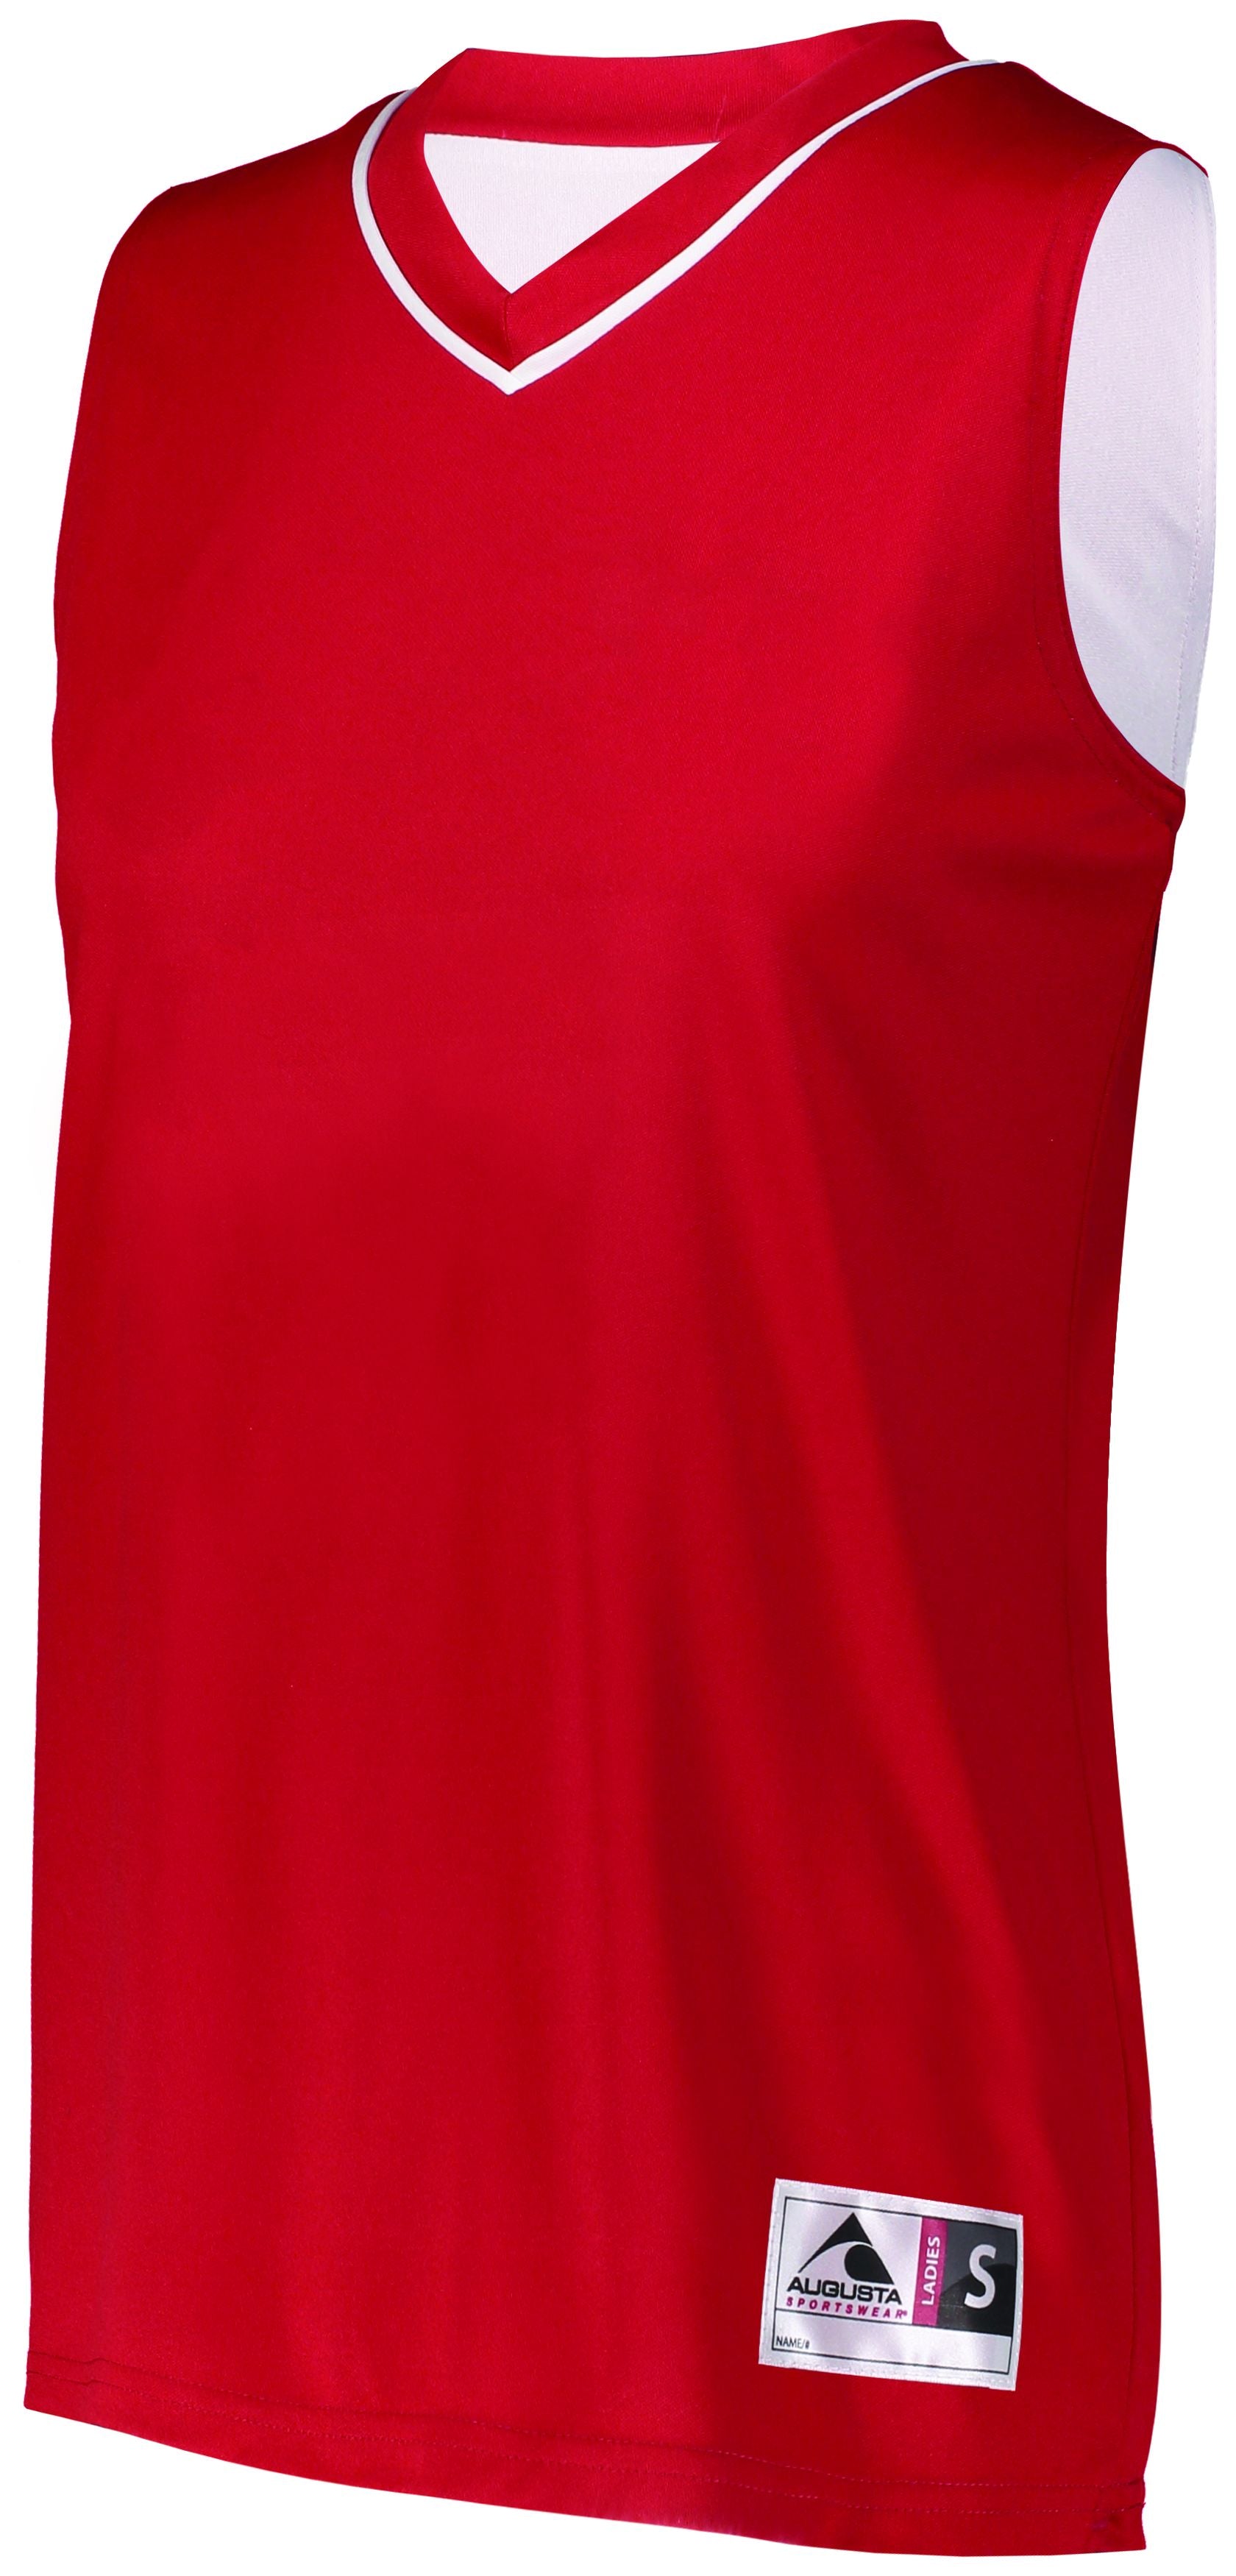 Augusta Sportswear Ladies Reversible Two-Color Jersey in Red/White  -Part of the Ladies, Ladies-Jersey, Augusta-Products, Basketball, Shirts, All-Sports, All-Sports-1 product lines at KanaleyCreations.com